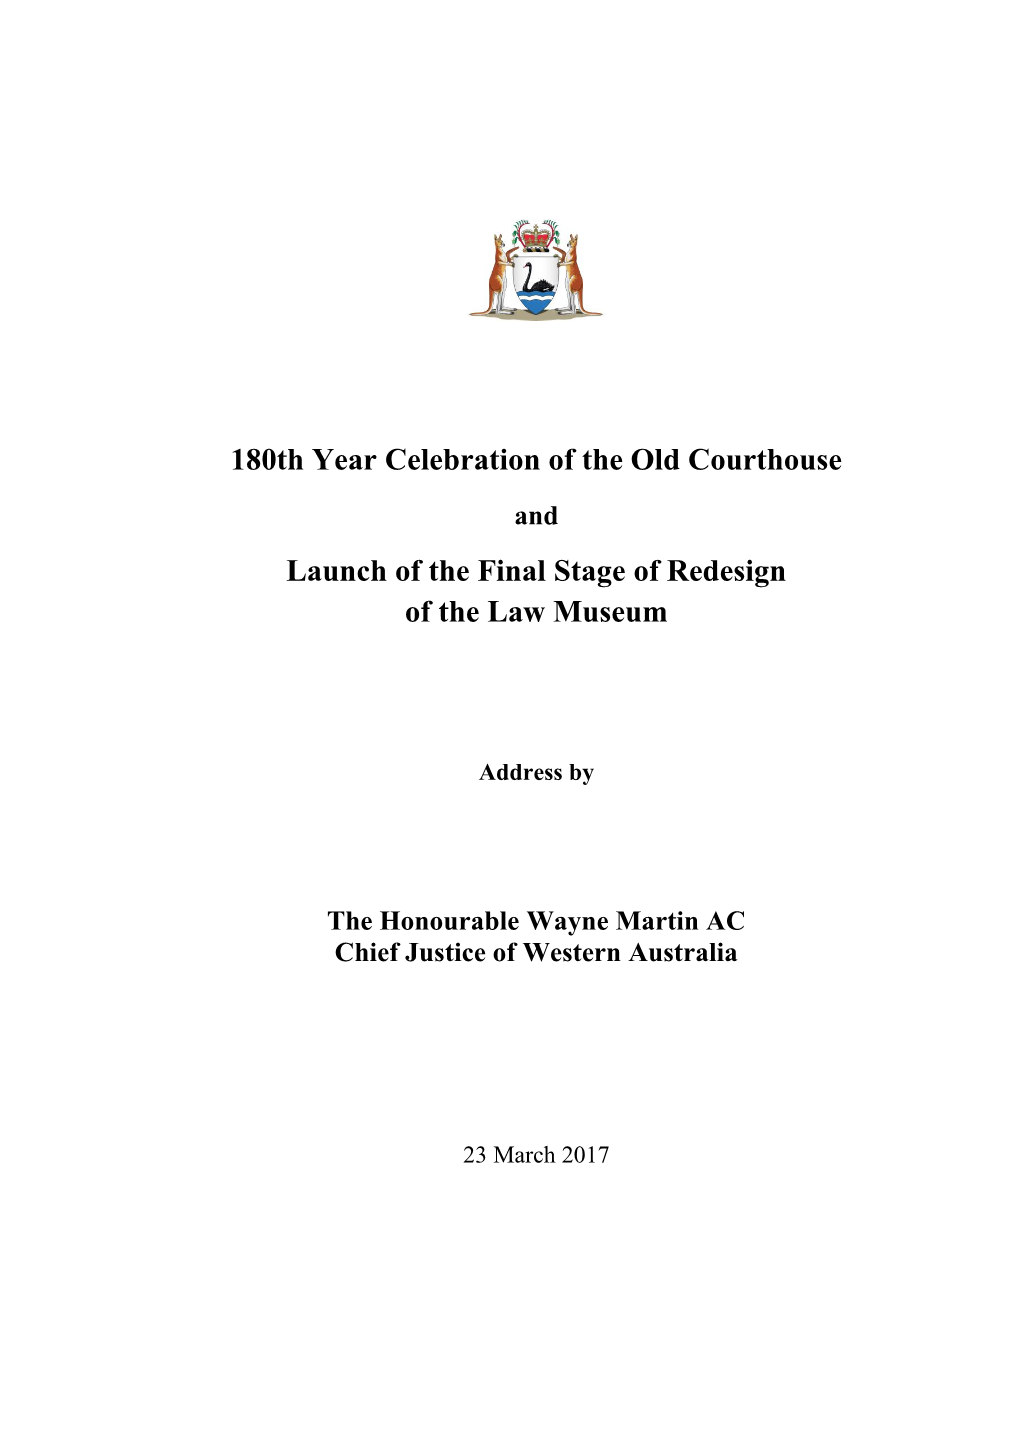 180Th Year Celebration of the Old Courthouse Launch of the Final